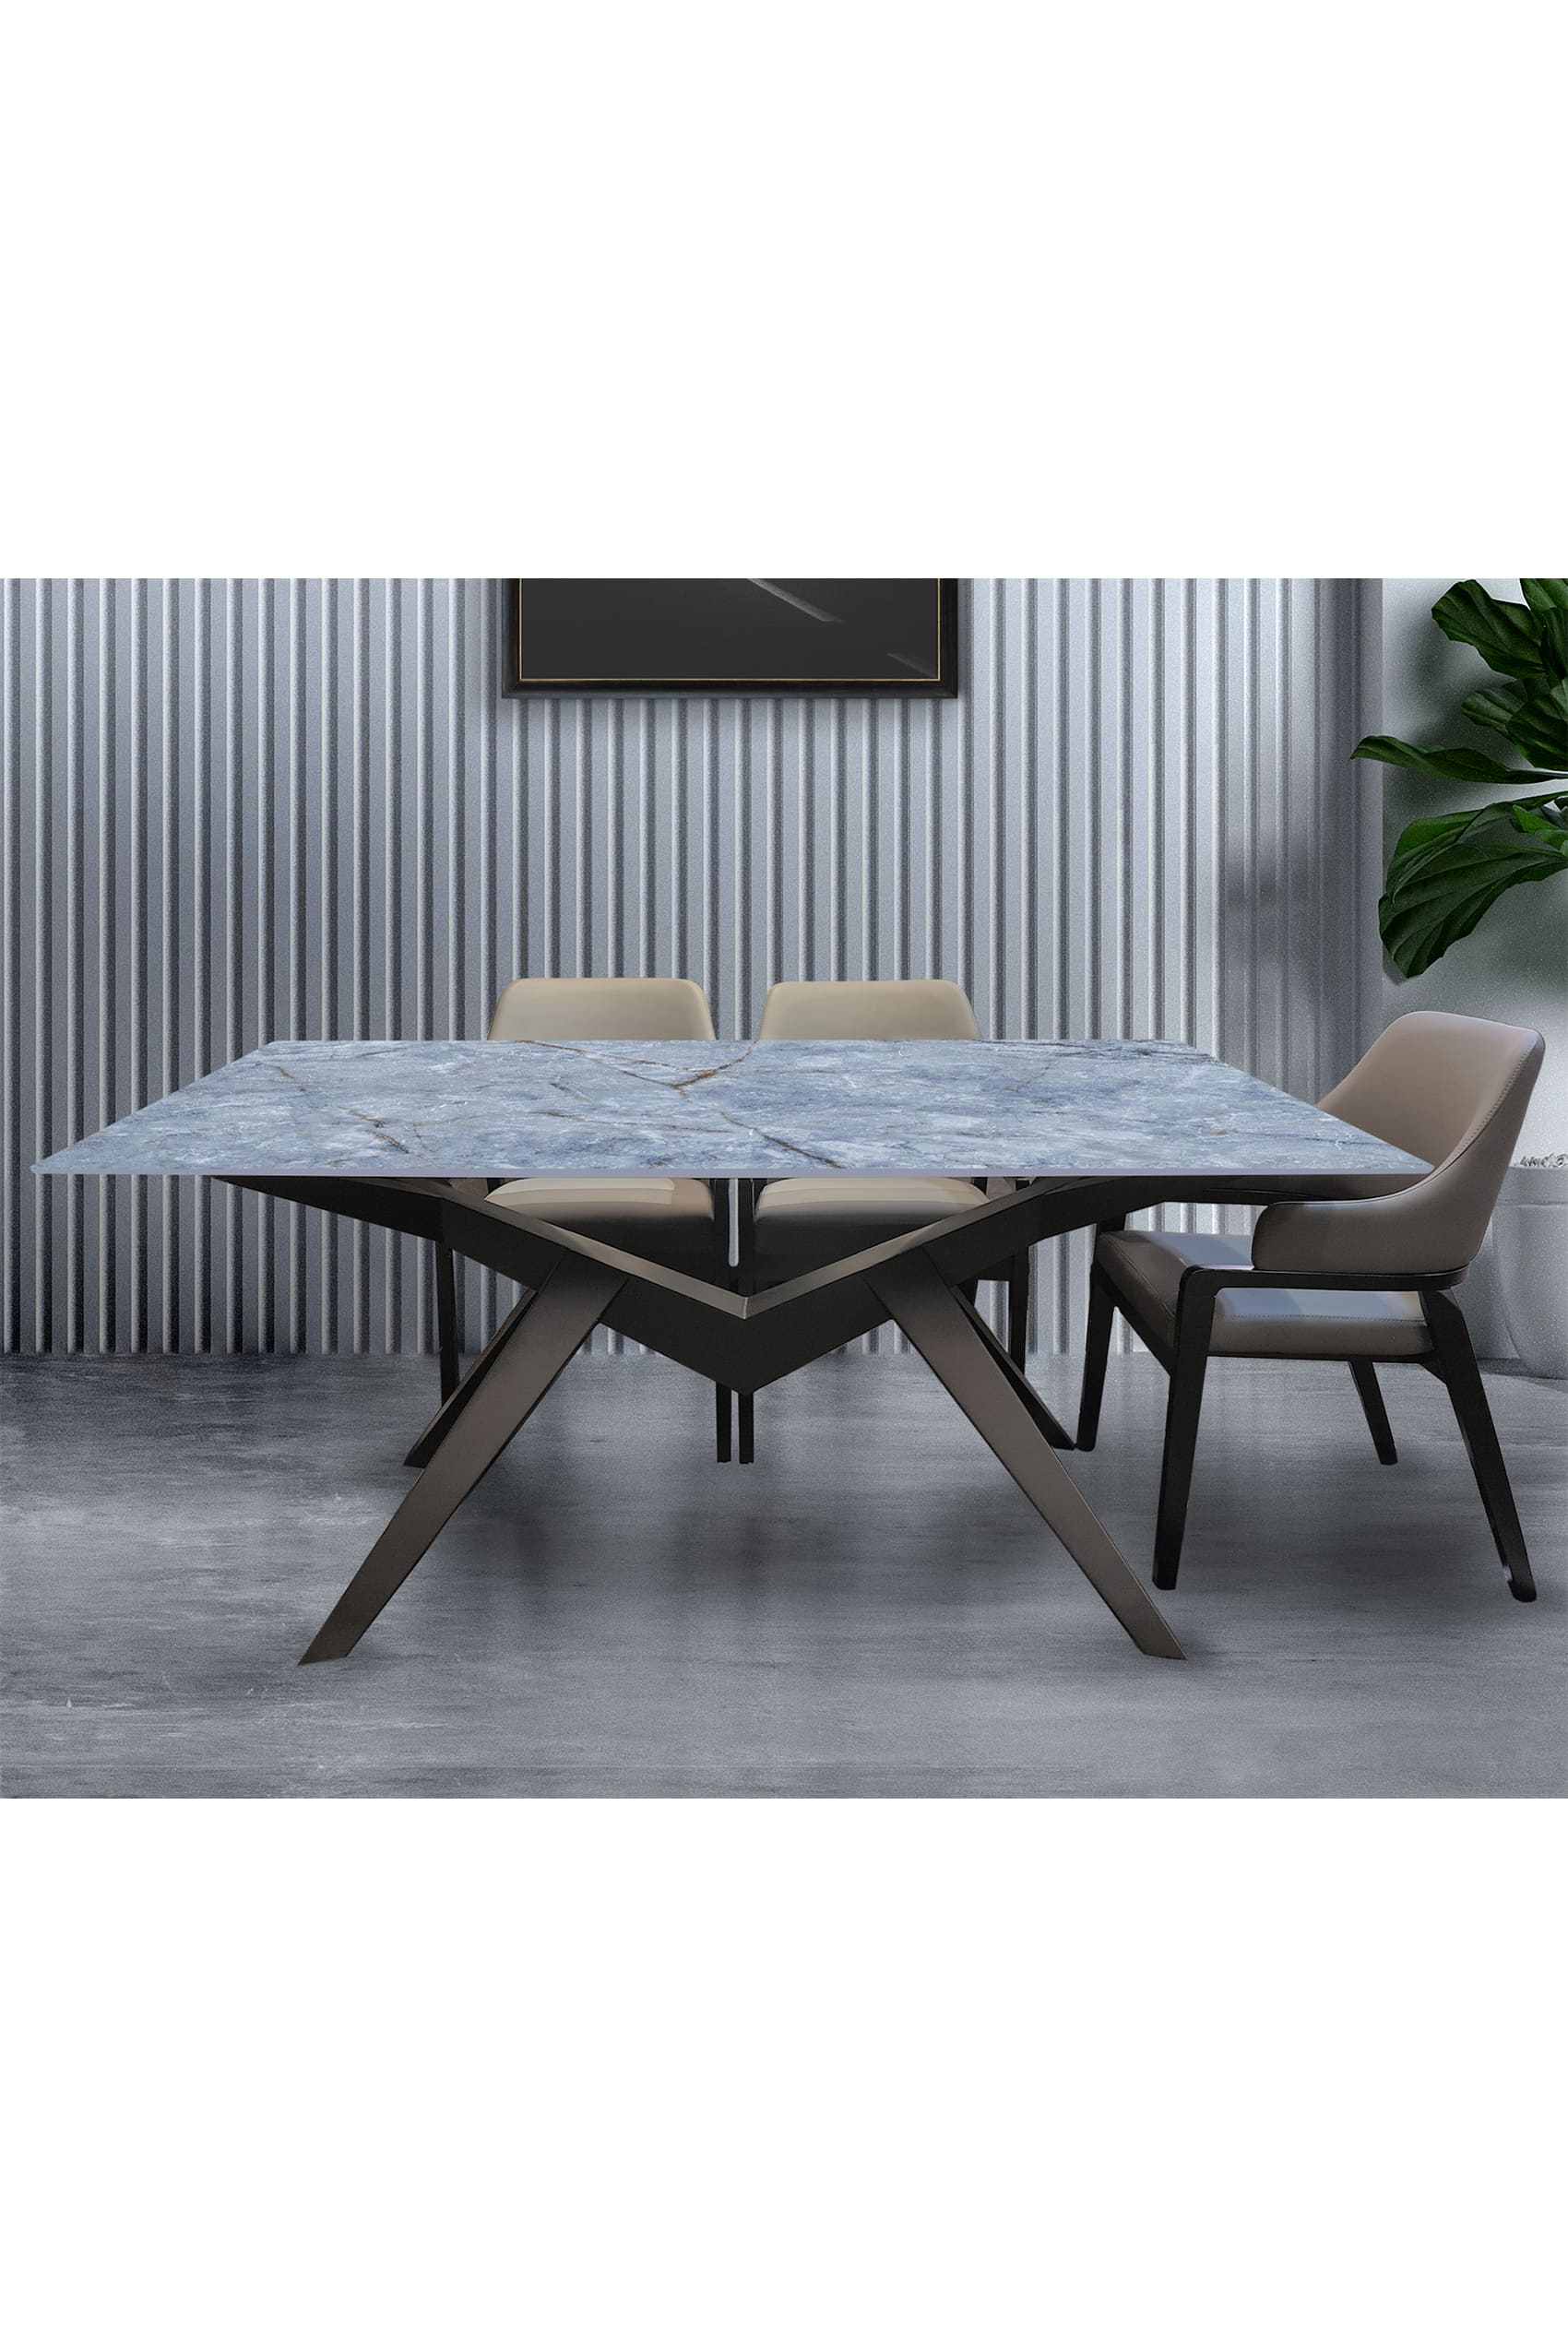 Cavalletto Sintered Stone Glossy Sapphire Blue Top Dining Table